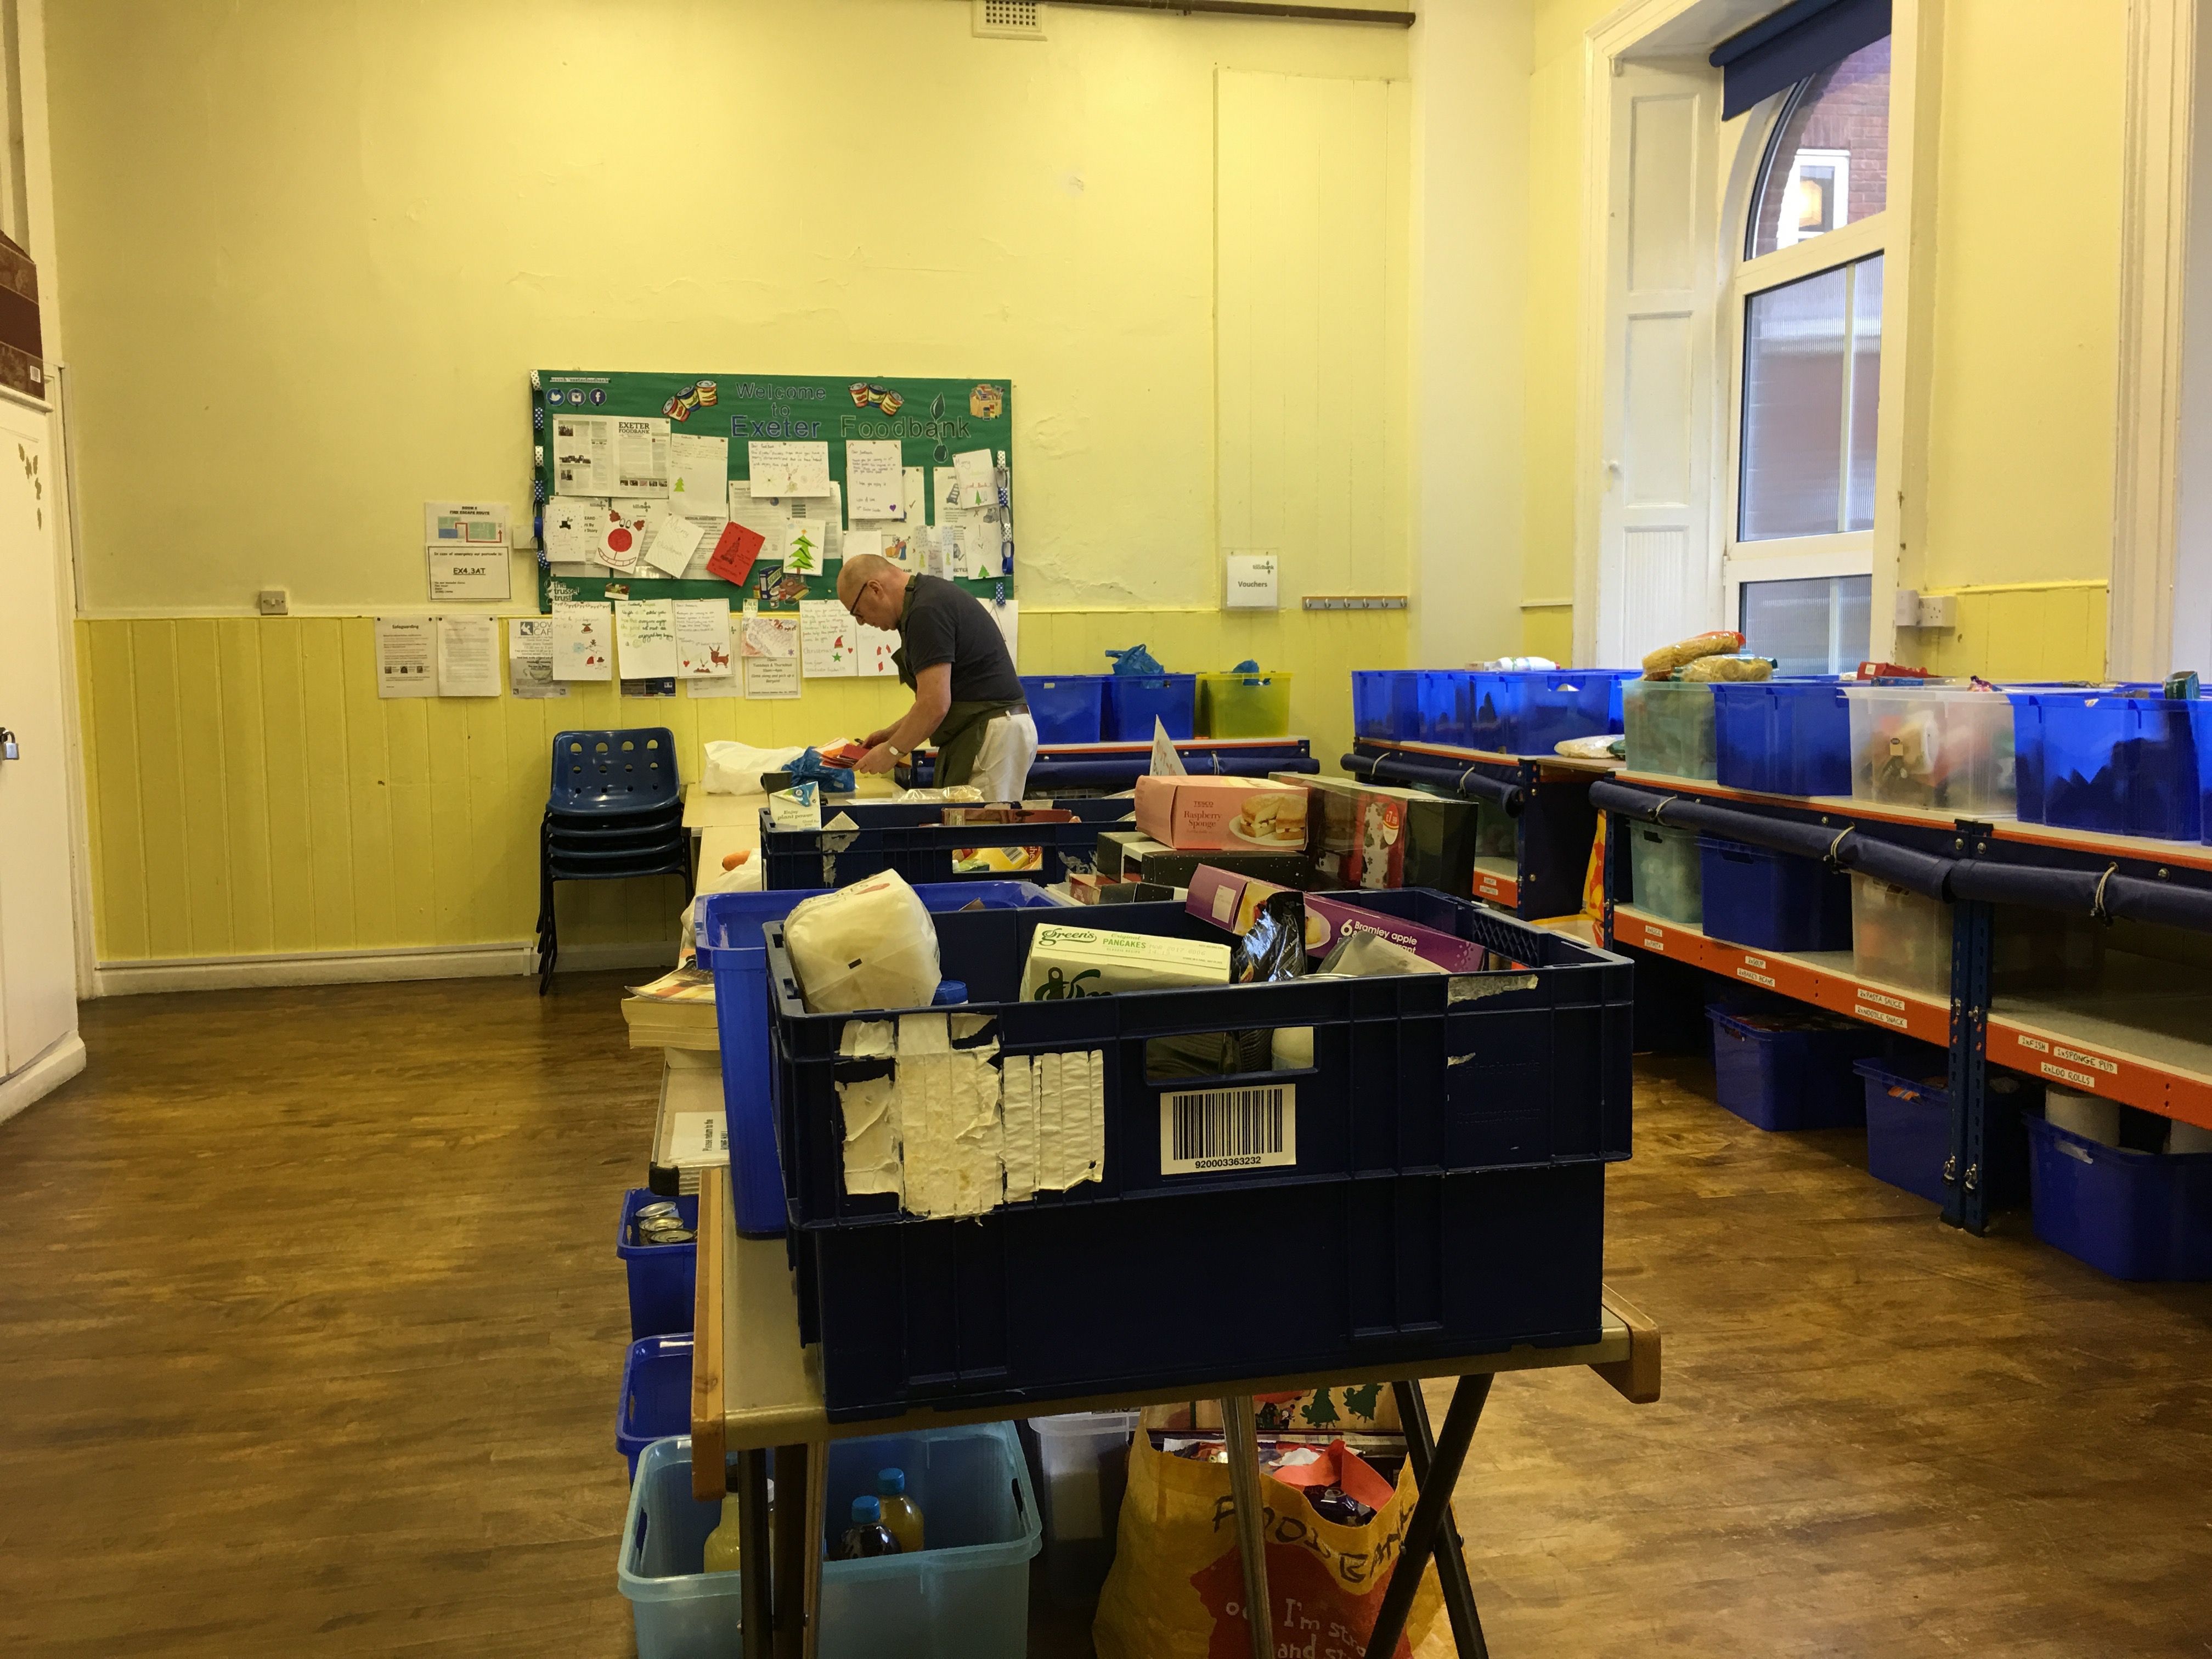 A volunteer clears up after the afternoon session, putting the unused food back into the cupboards lining the wall. The church hall offers highly versatile space - useful and necessary for this expanding organisation. Image by Caitlin Bawn. England, 2016.